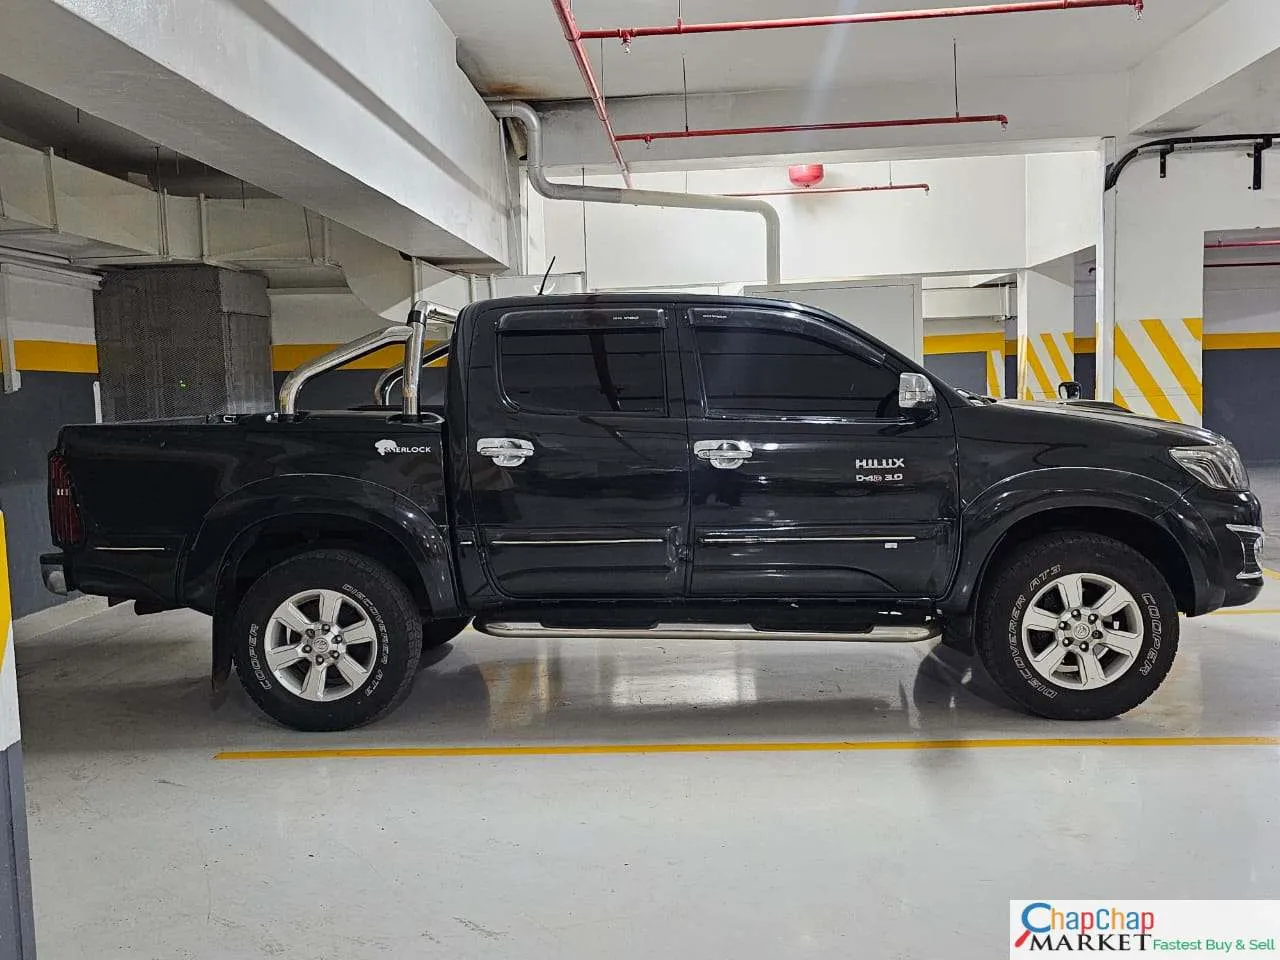 Cars For Sale-Toyota Hilux Double cab QUICK SALE You Pay 30% Deposit Installments trade in OK Hire purchase